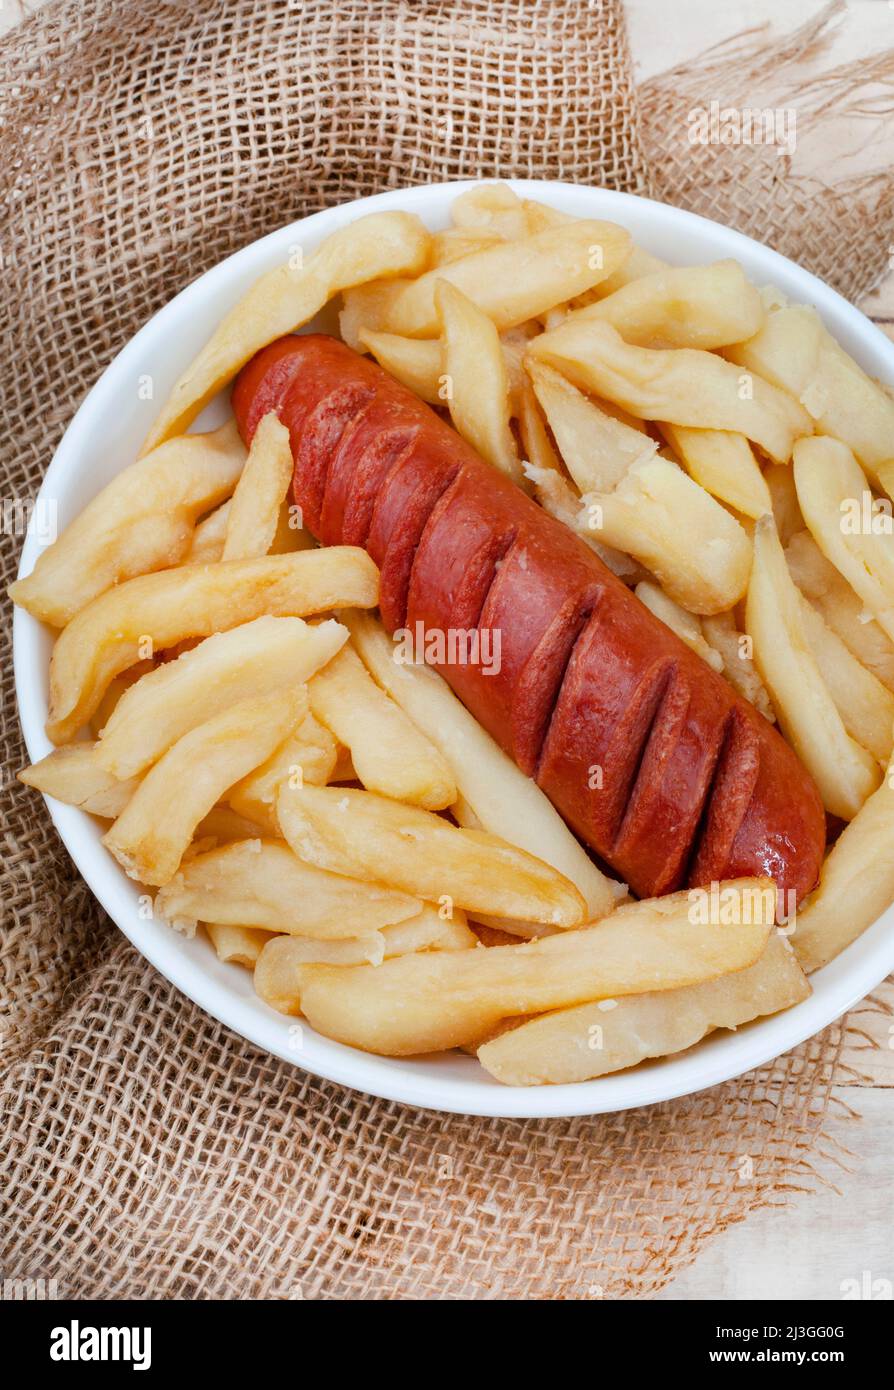 traditional South African take away or street food, Russian sausage and potato chips Stock Photo